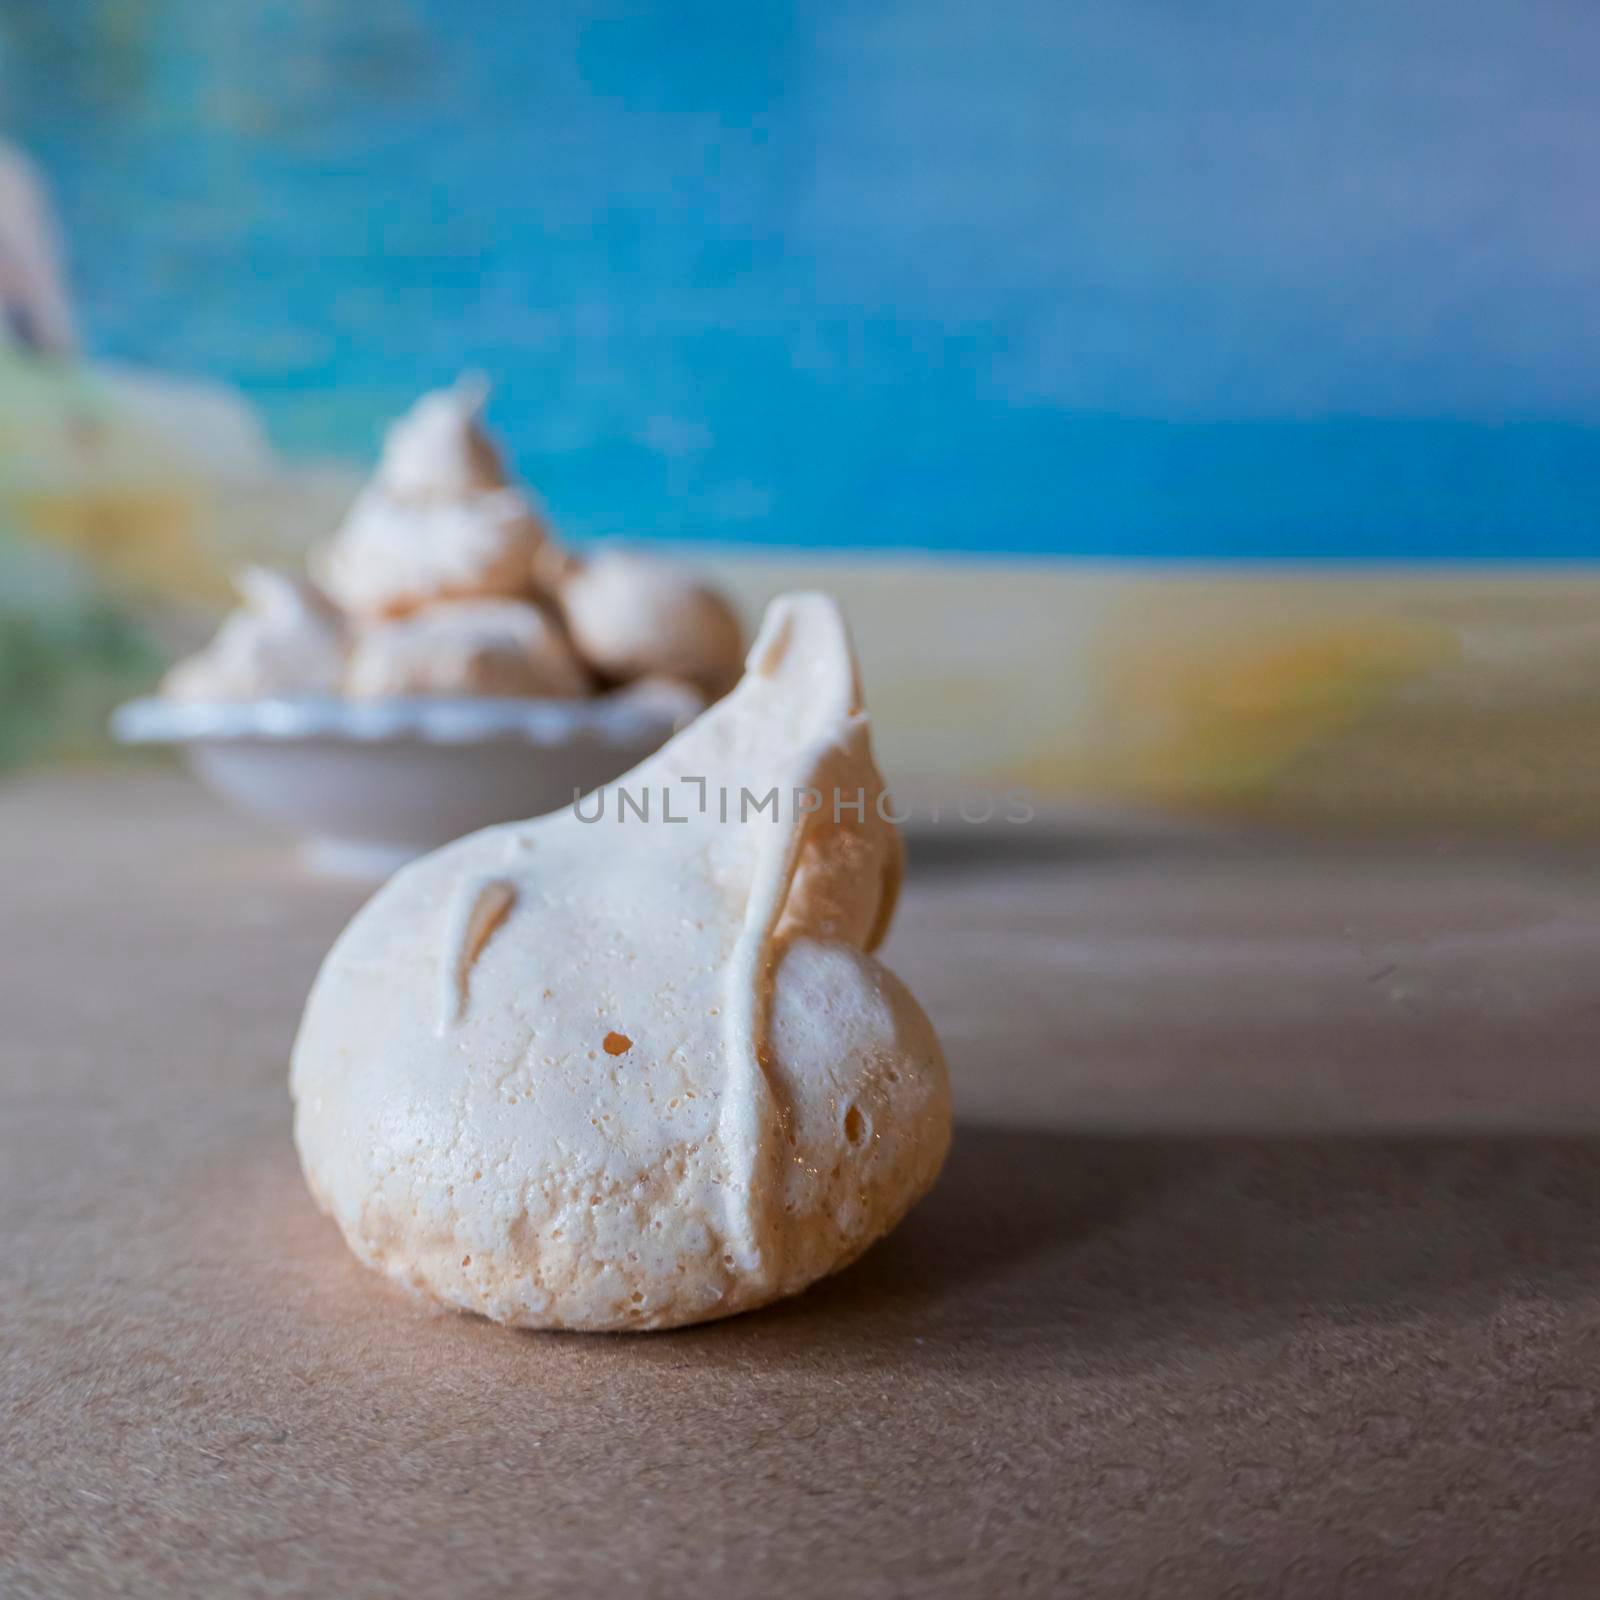 Homemade french milk-colored meringues on crumpled craft paper. delicious homemade meringues on craft paper